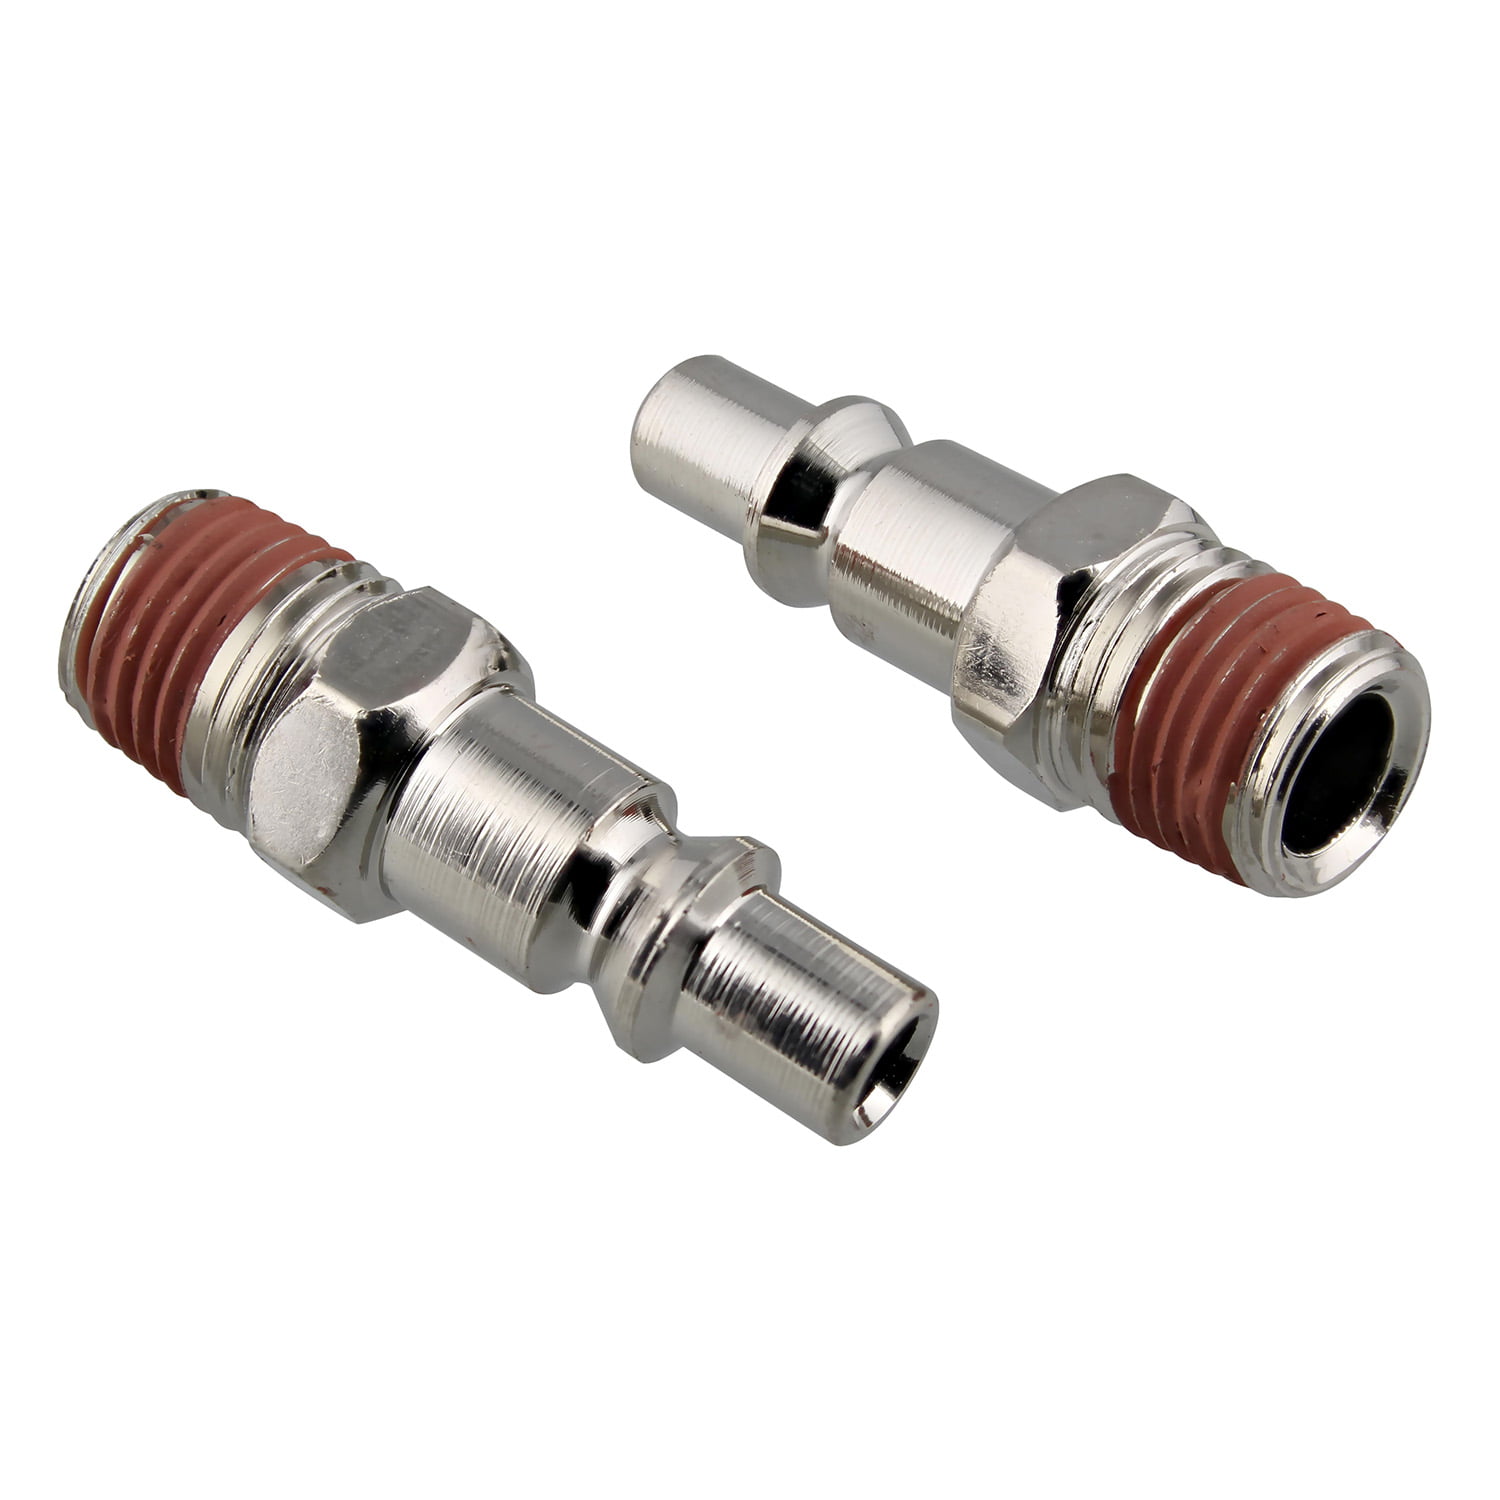 2 Way/ 3 Way Heavy Duty Quick Coupler Air Hose Connector Fittings 1/4 NPT Tools 